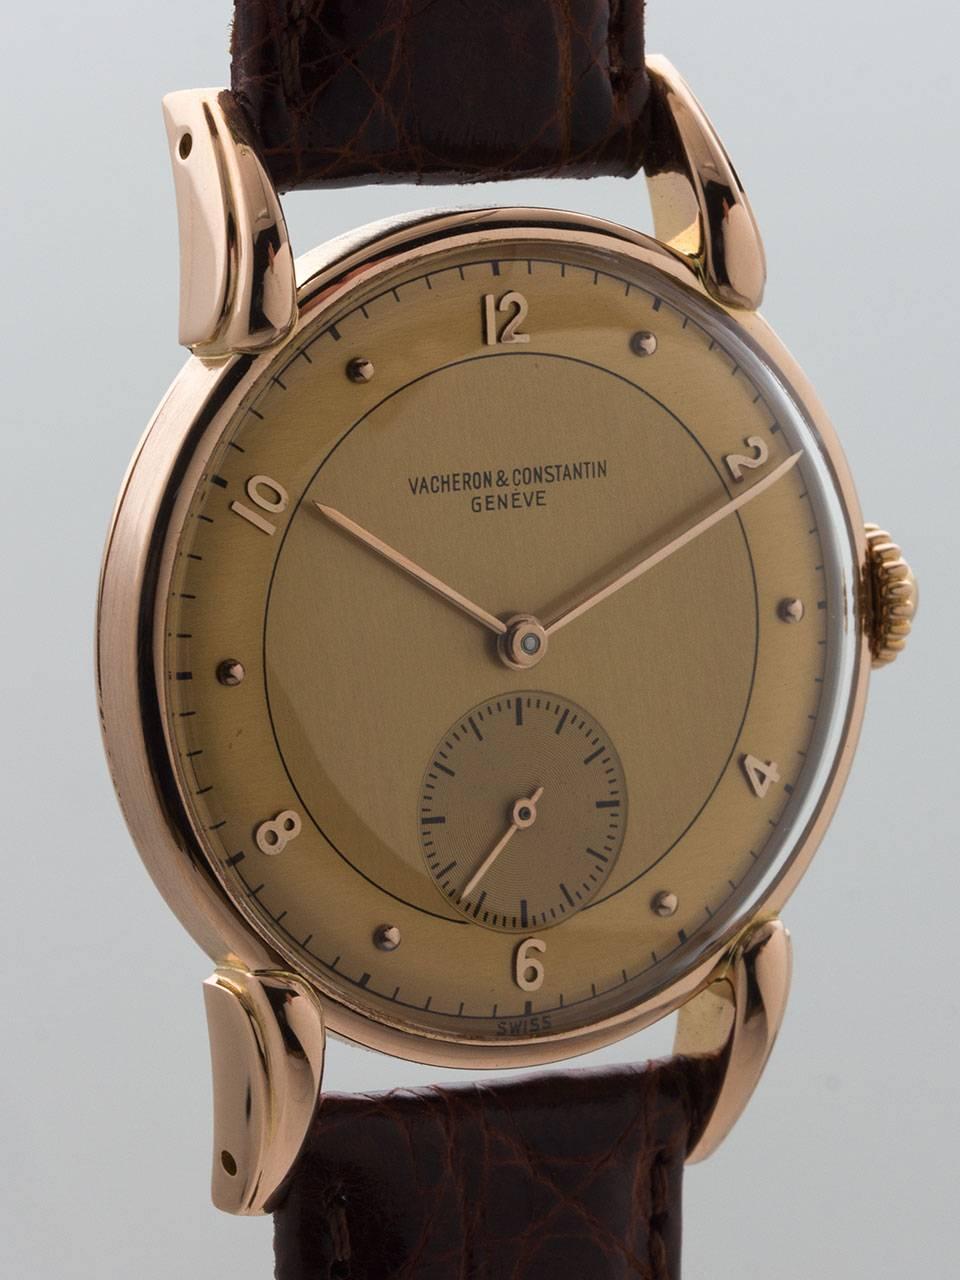 Vacheron & Constantin 18K Rose Gold Large Dress Wristwatch circa 1950s. 34 x 44mm large and beautiful case with elegant lugs, crown and acrylic crystal. Two tone antique salmon dial with applied rose color Arabic numerals, indexes and hands. Powered